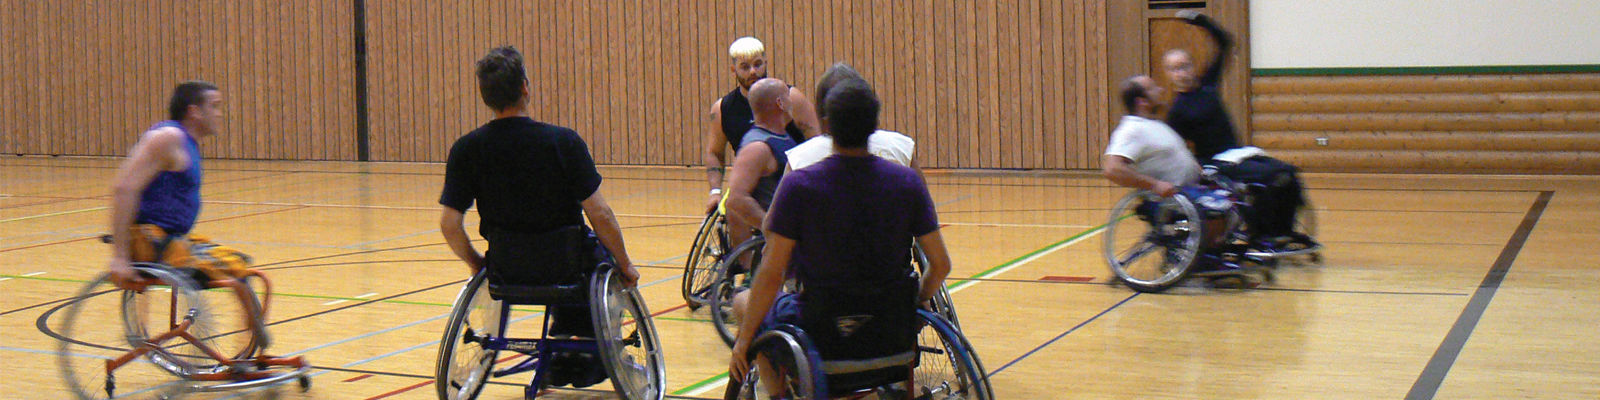 A group of man in wheelchairs playing basketball